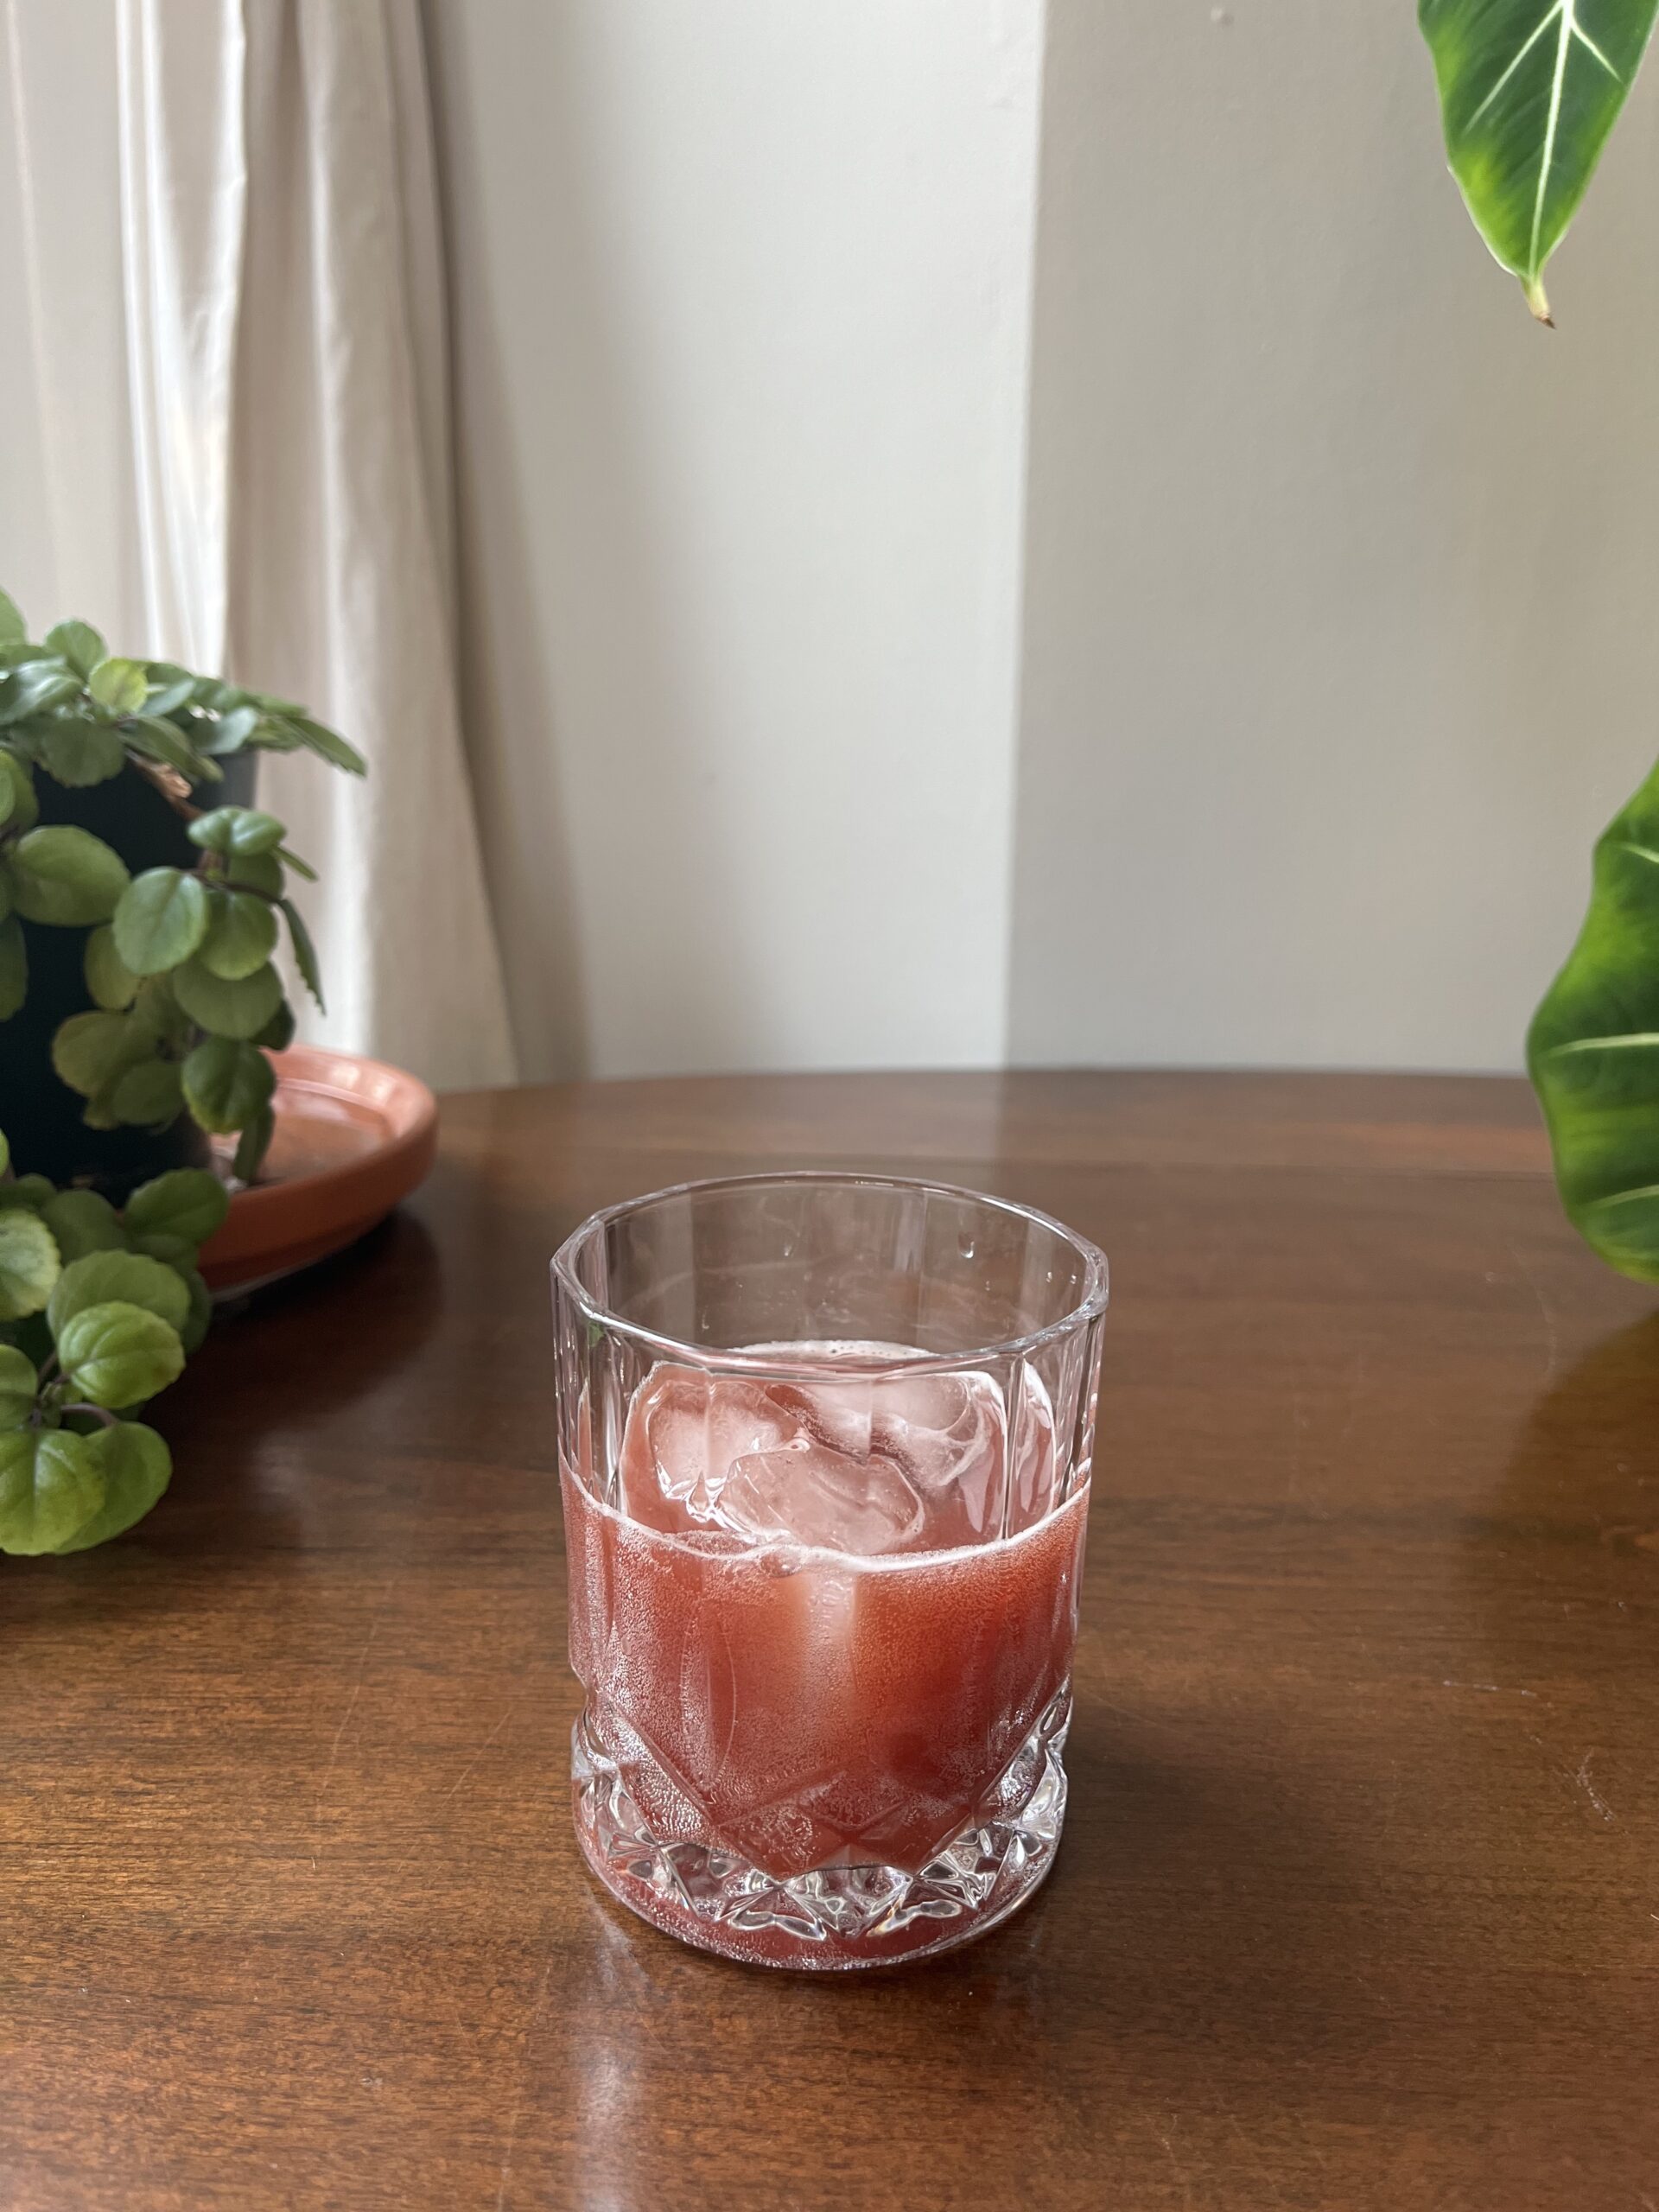 A glass filled with a red iced drink sits on a wooden table, surrounded by green potted plants in the background.